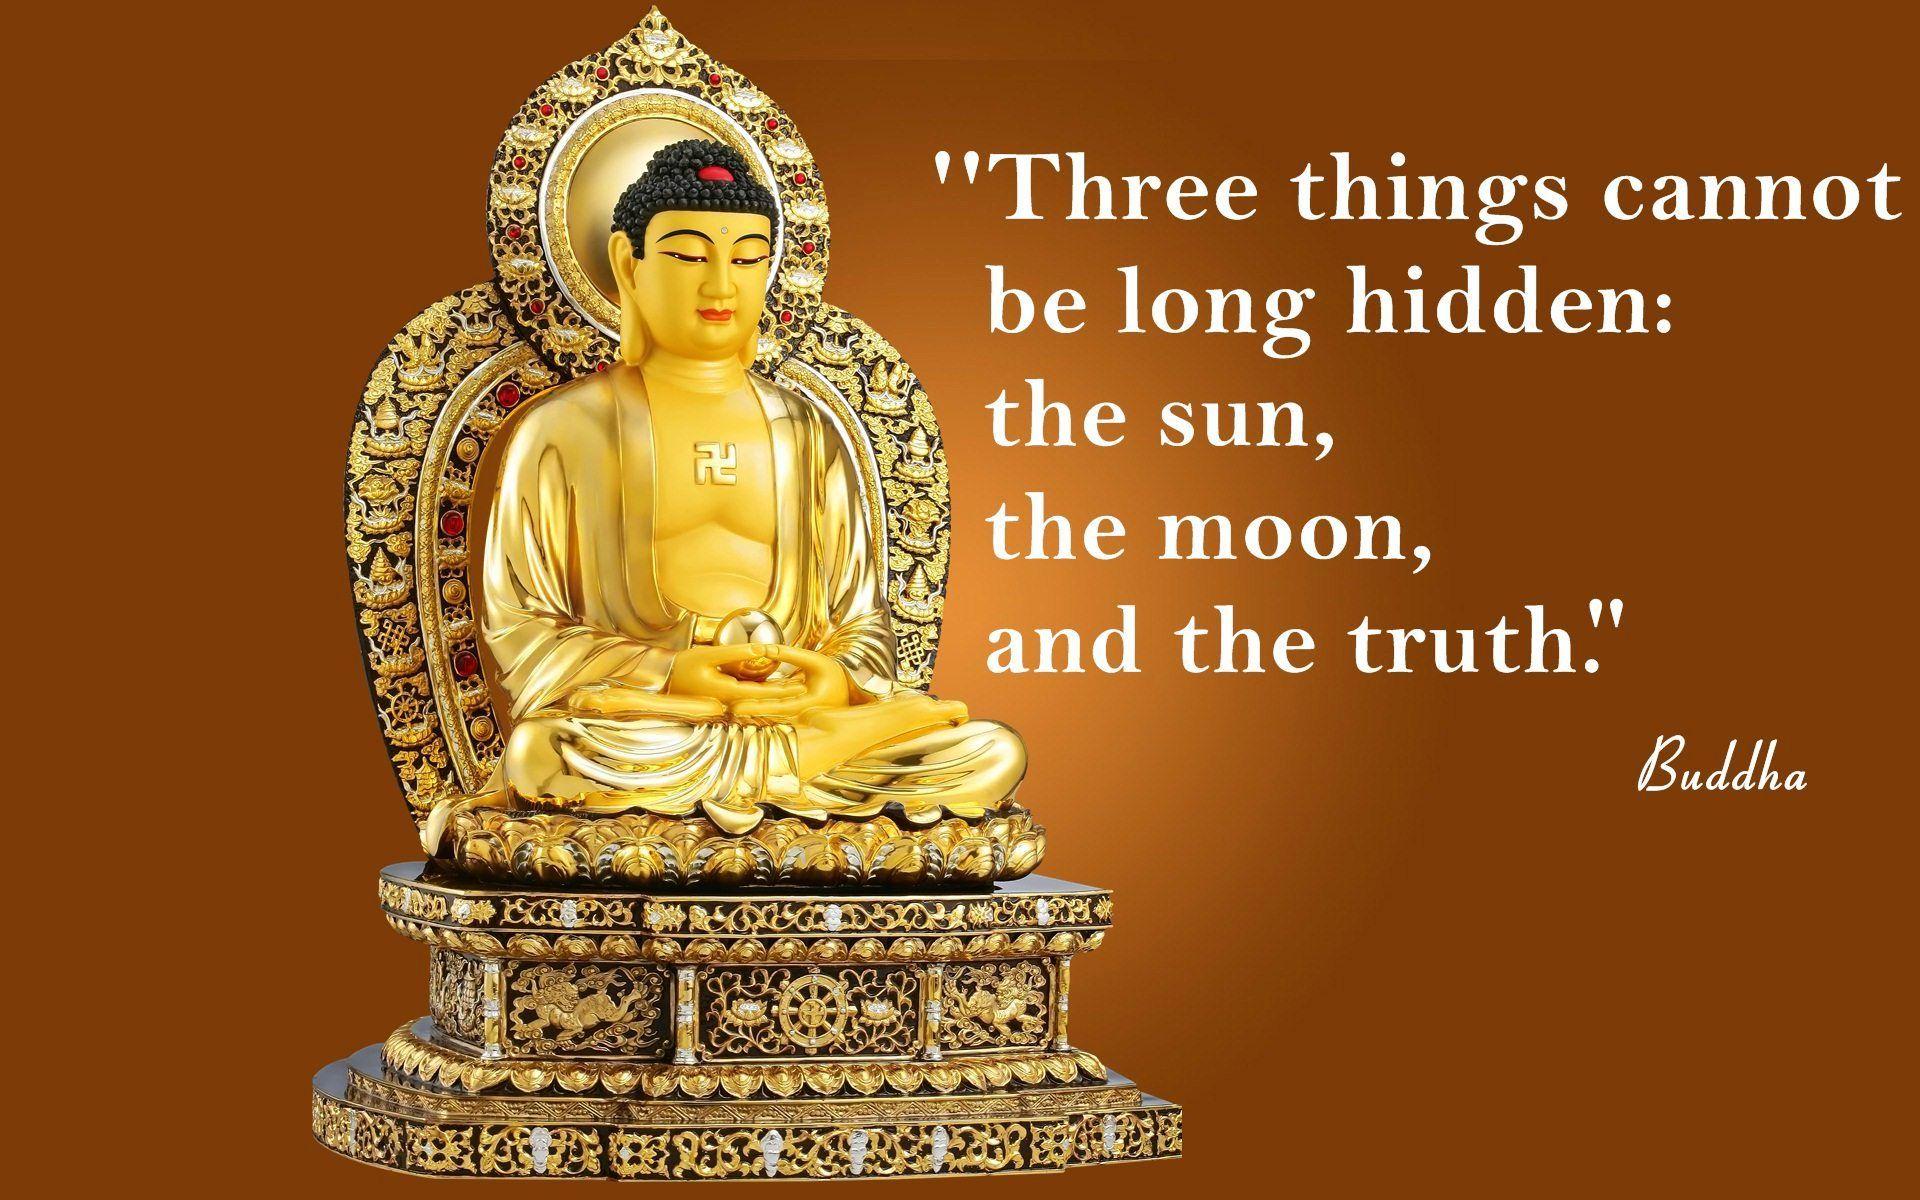 Gautama Buddha Quotes. QUOTES OF THE DAY